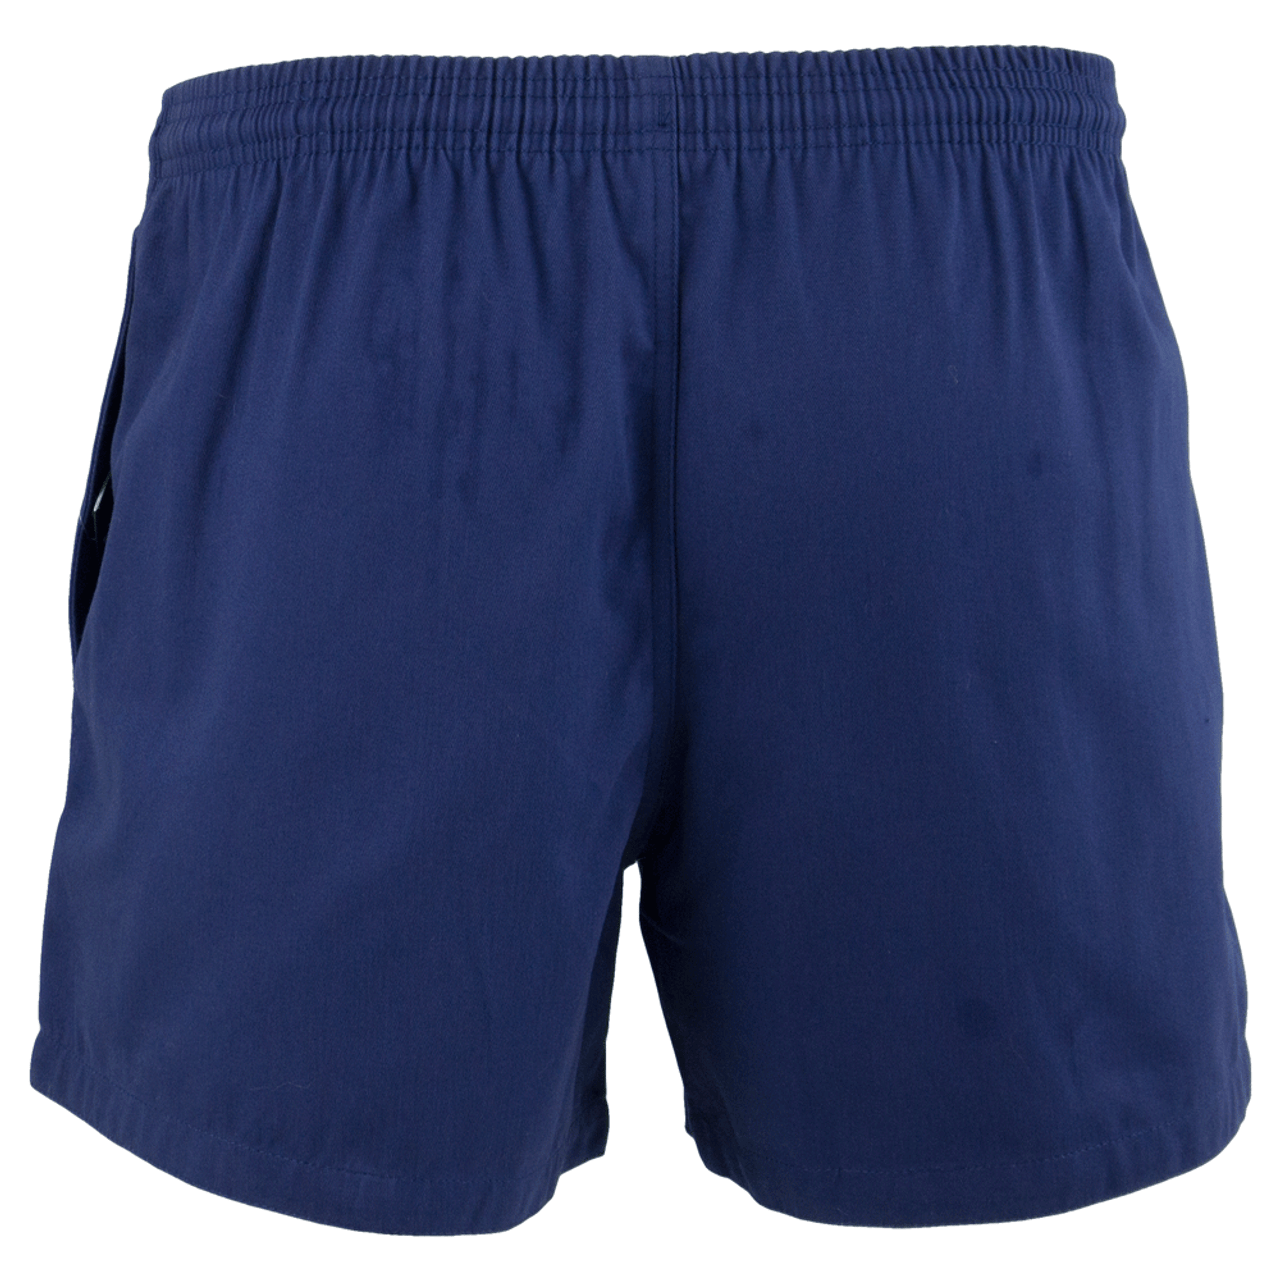 Gilbert Kiwi Pro Rugby Shorts - Blue on sale at Rugby City | 14.99